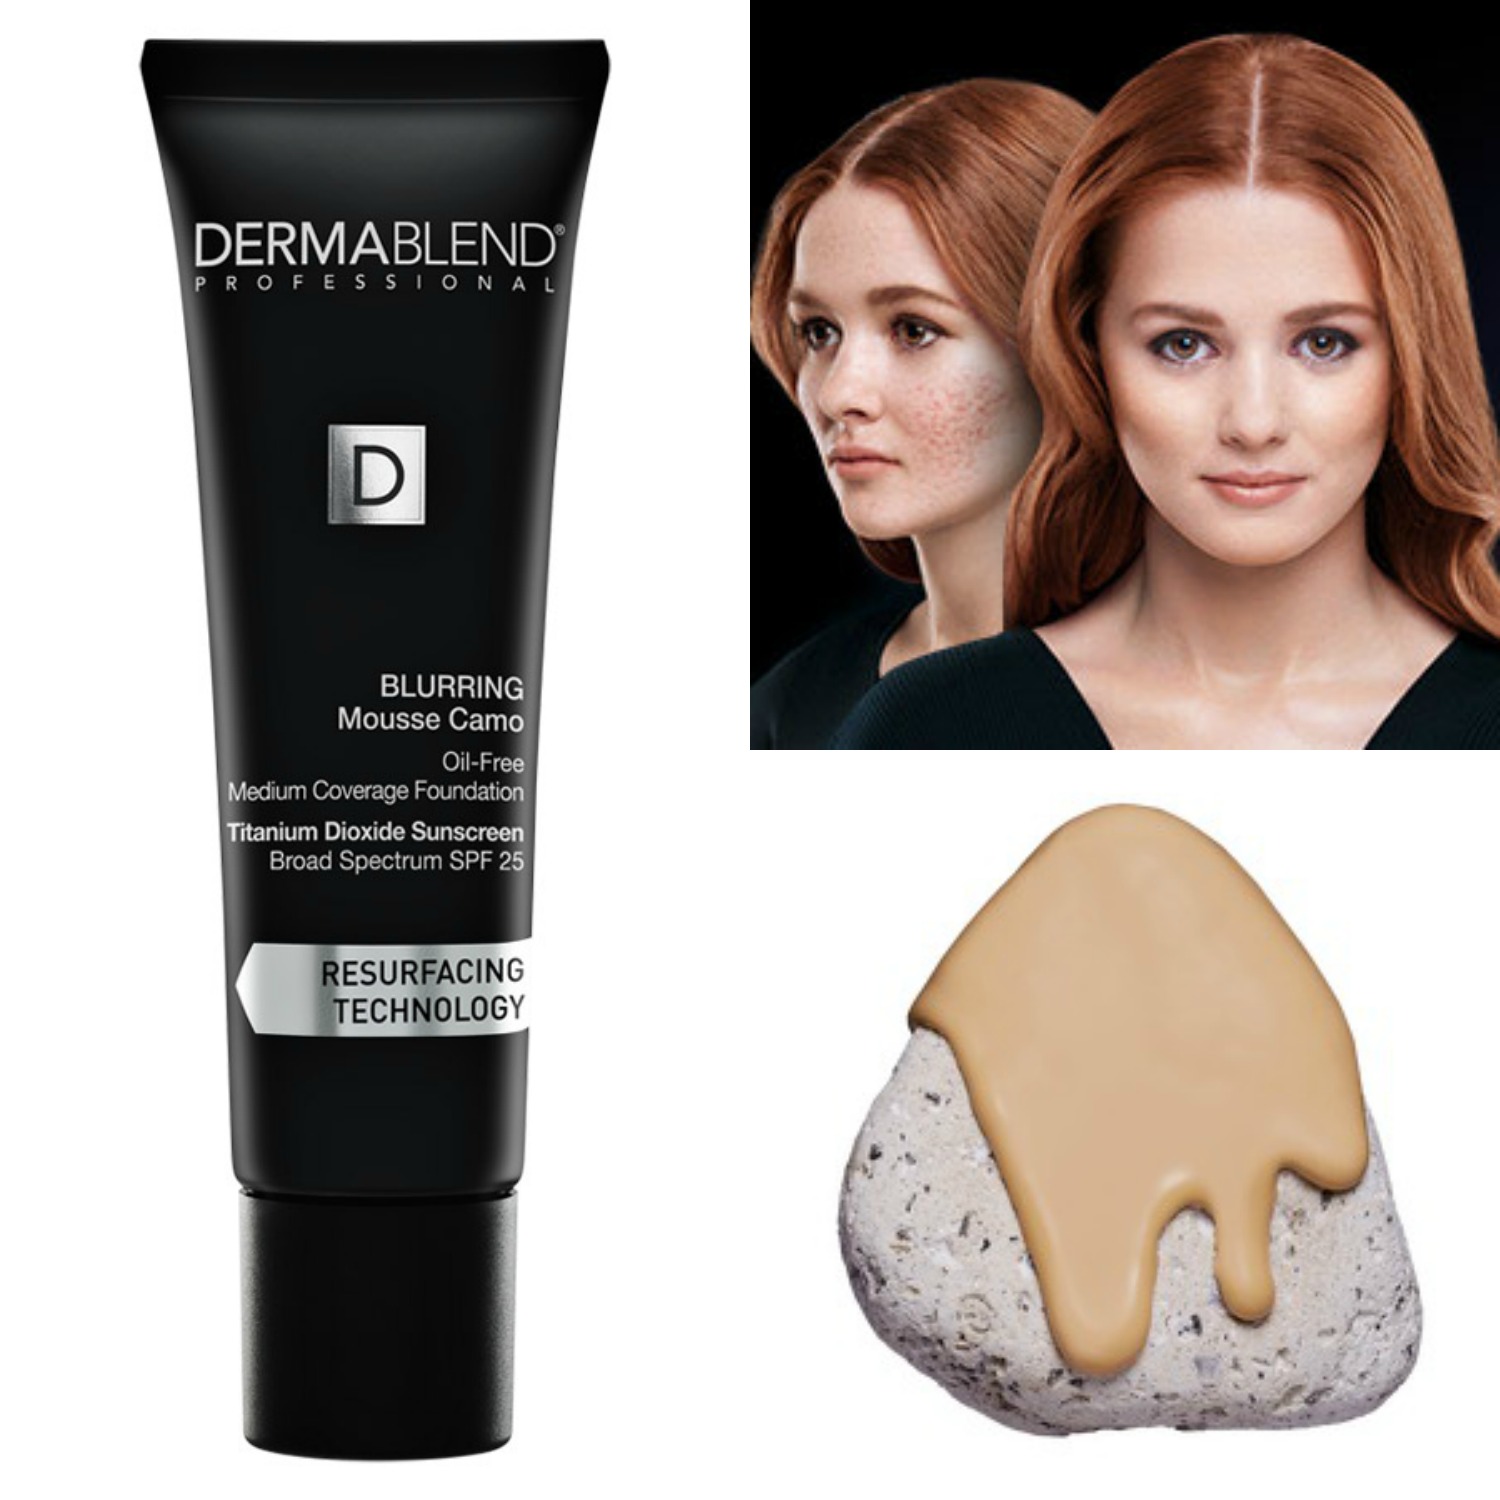 Dermablend Blurring Mousse Camo, $38.